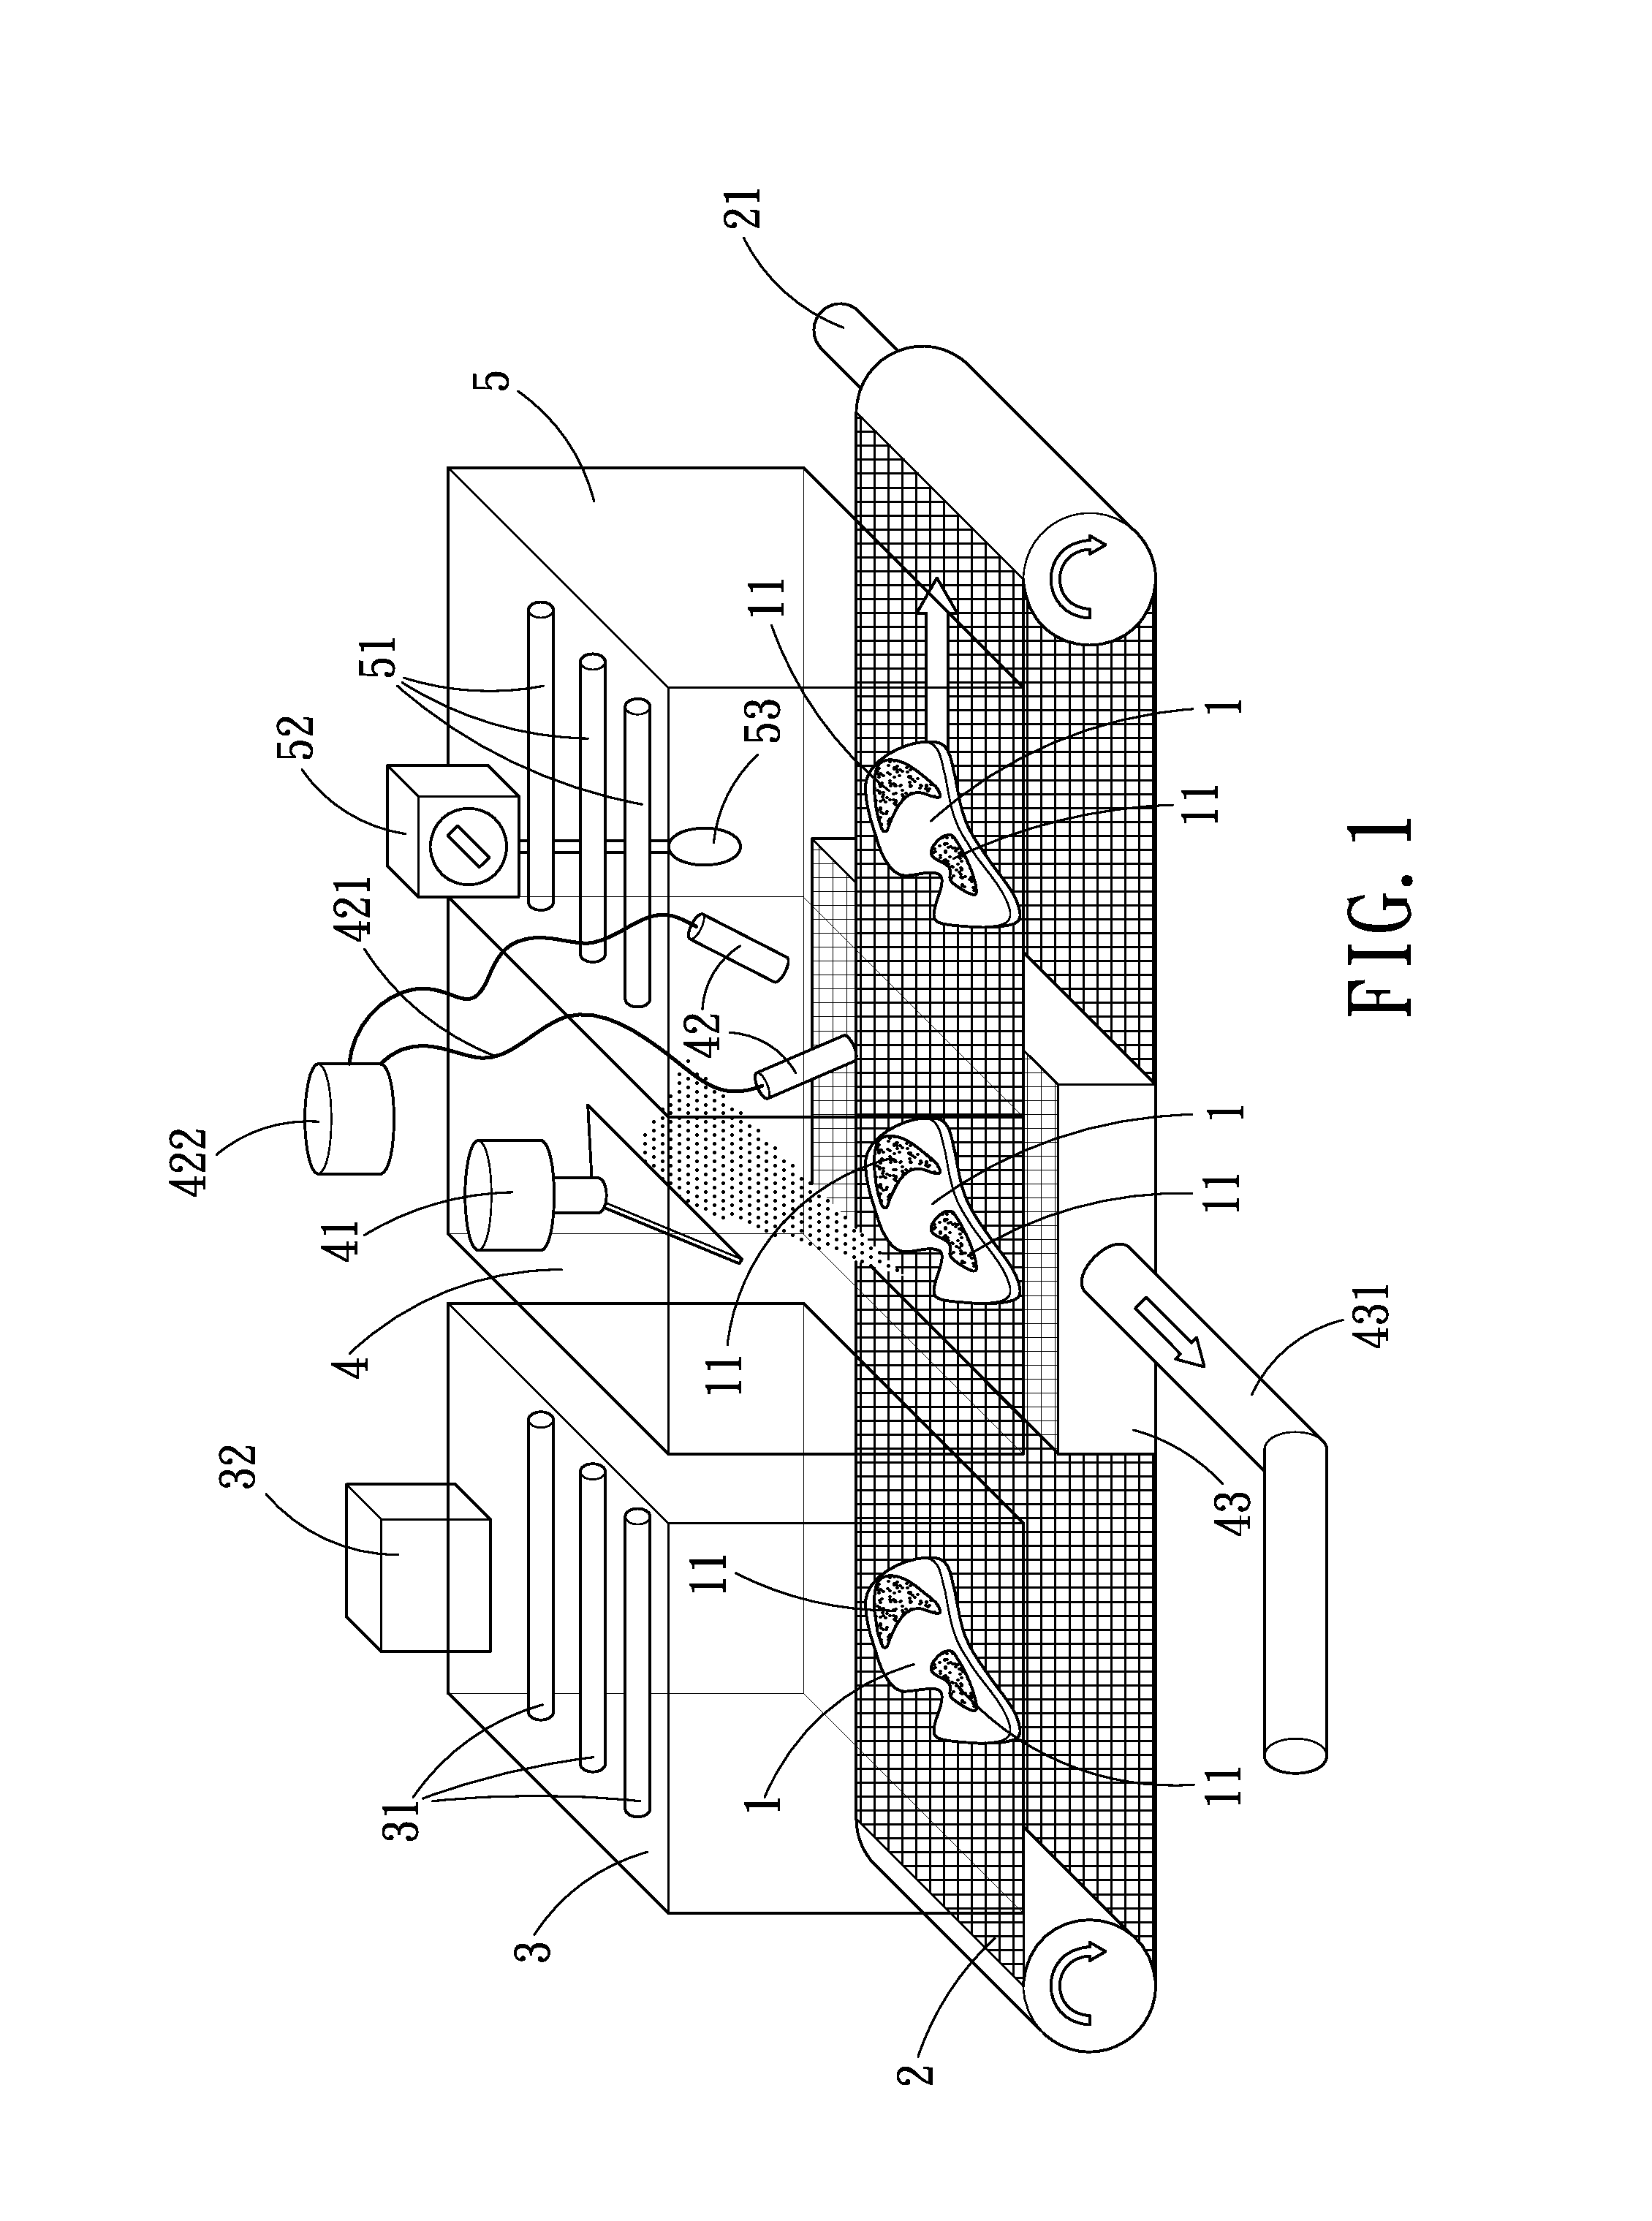 Method For Applying Hot Melt Adhesive Powder Onto A Shoe Or Sole Part